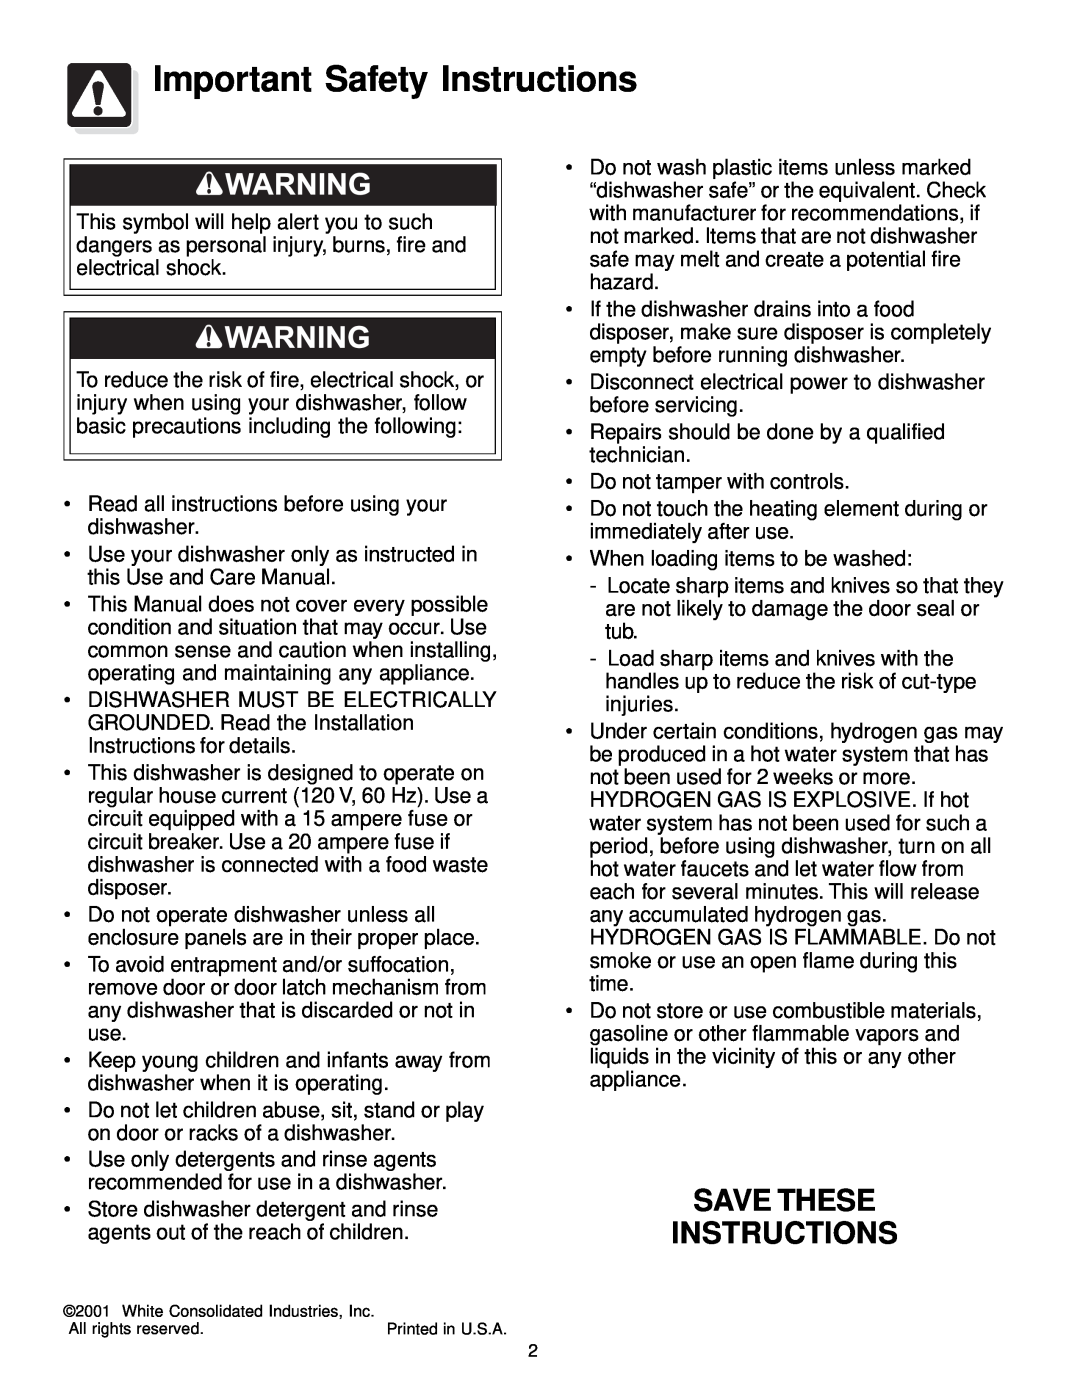 Frigidaire 400 Series warranty Important Safety Instructions, Save These Instructions 